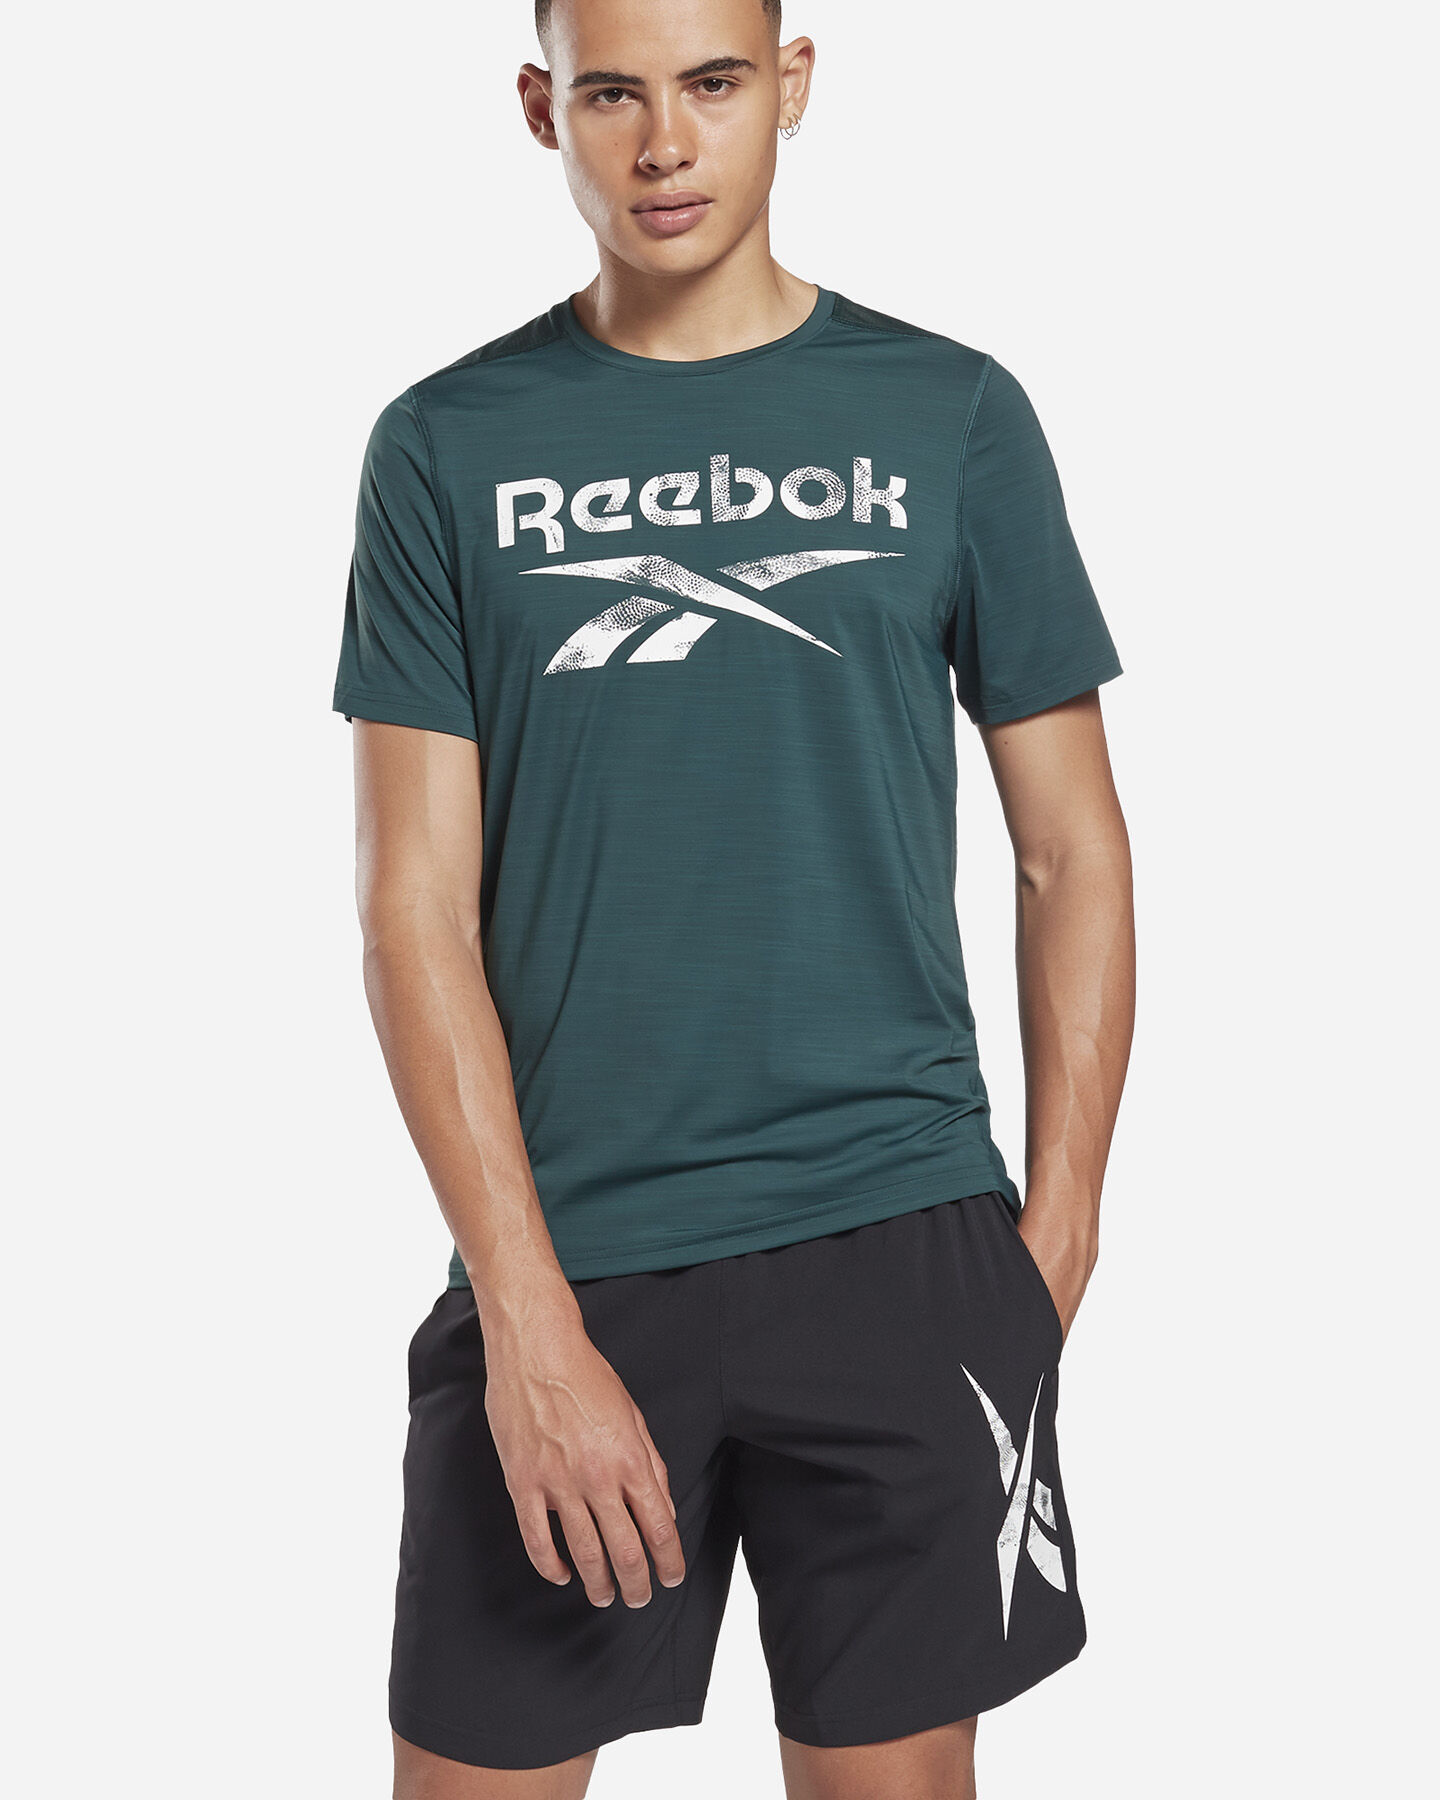  T-Shirt training REEBOK WORKOUT GRAPHIC M S5280279|UNI|S scatto 2